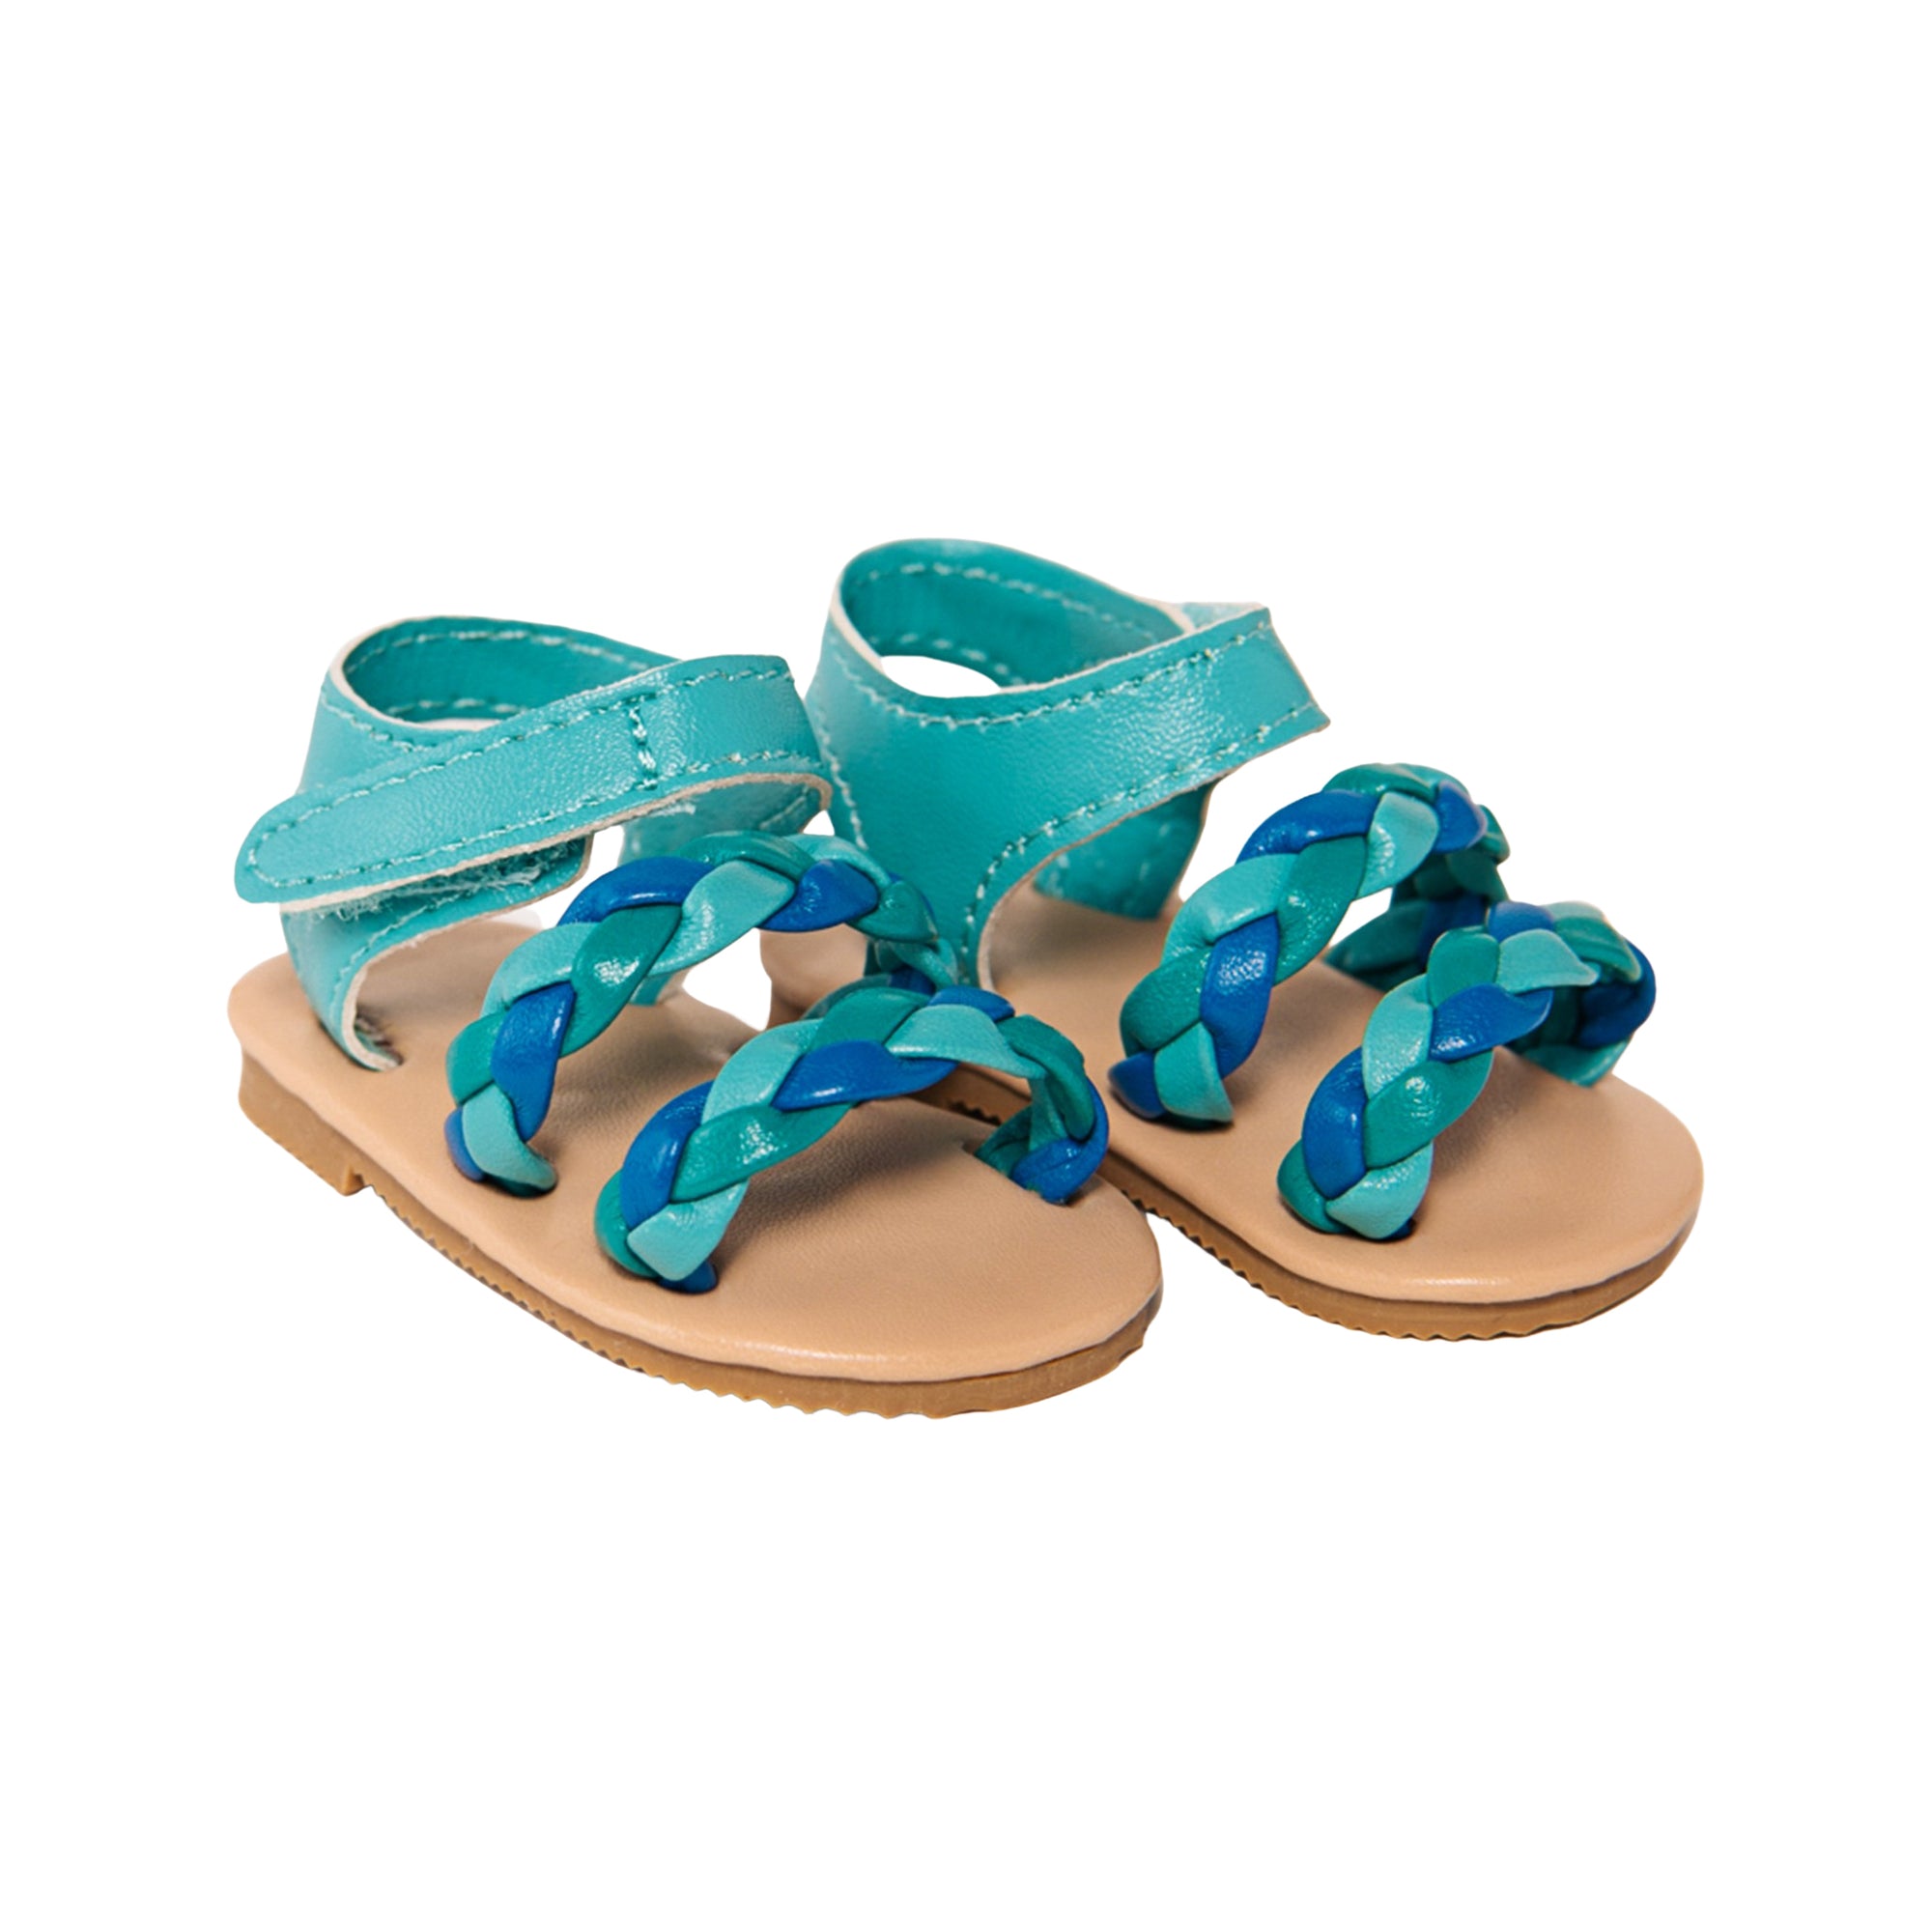 cute braided sandals for 18-inch dolls in aqua and teal